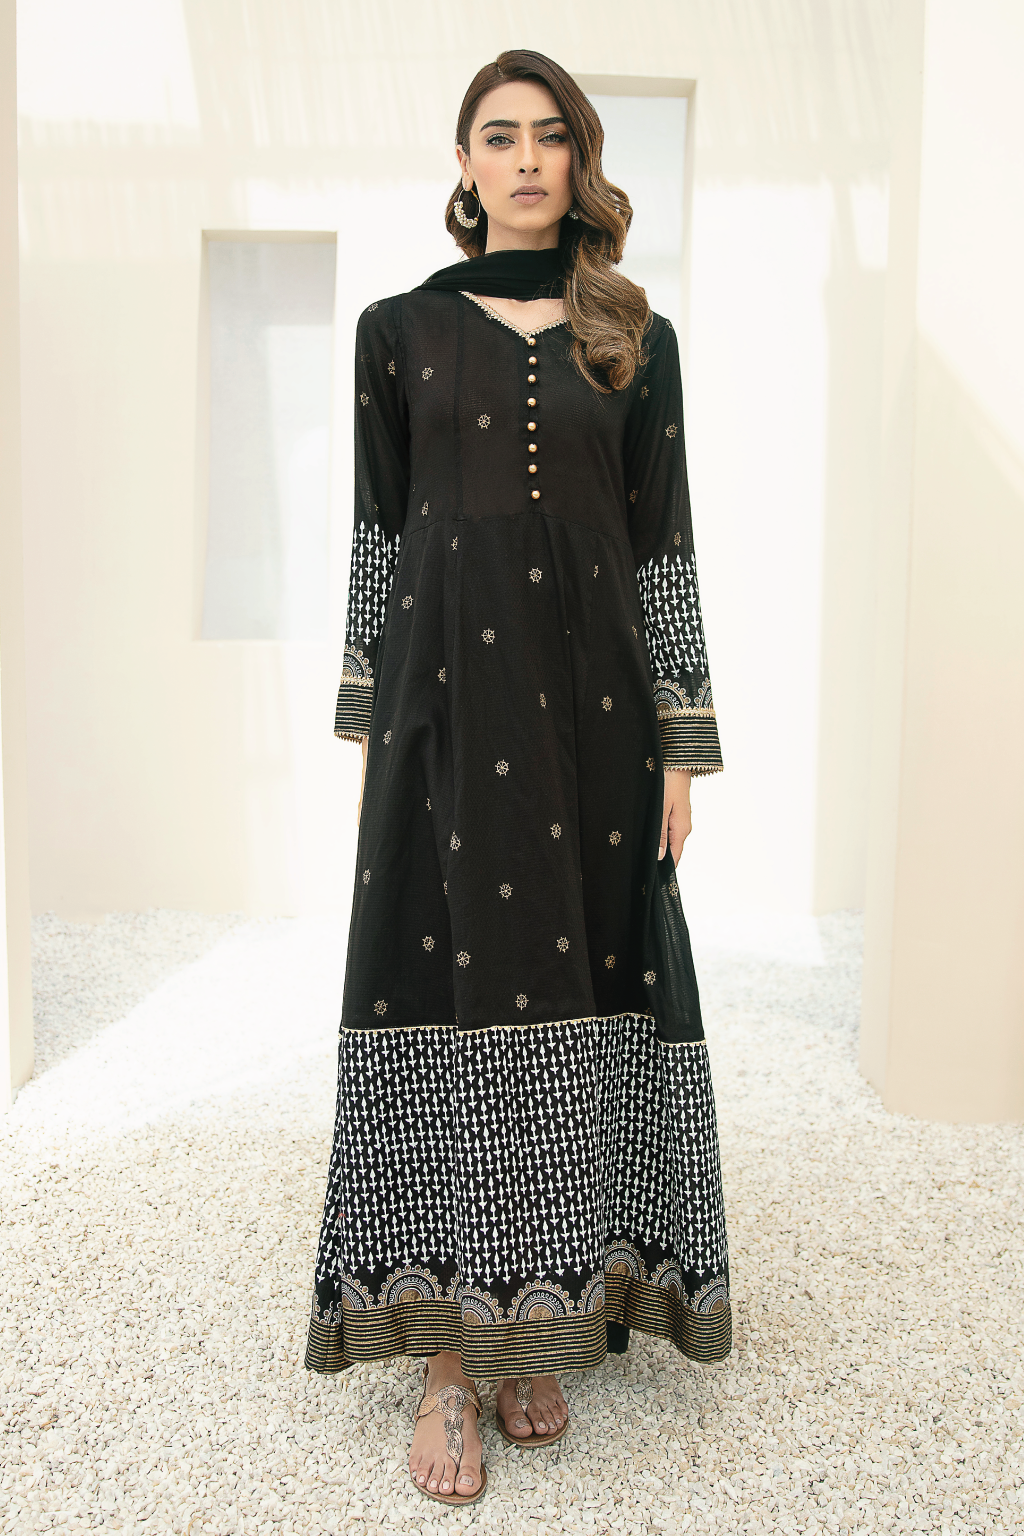 Iznik Pret Wear 2021 | ARRAY PANTHER Black 1 piece lawn dress is most popular for Eid dress and summer outfits. We have wide range of stitched and Readymade dresses of Iznik lawn 2021, Iznik pret '21. This Eid get yourself elegant and classy outfit of Iznik in USA, UK, France, Spain from Lebaasonline at SALE price!